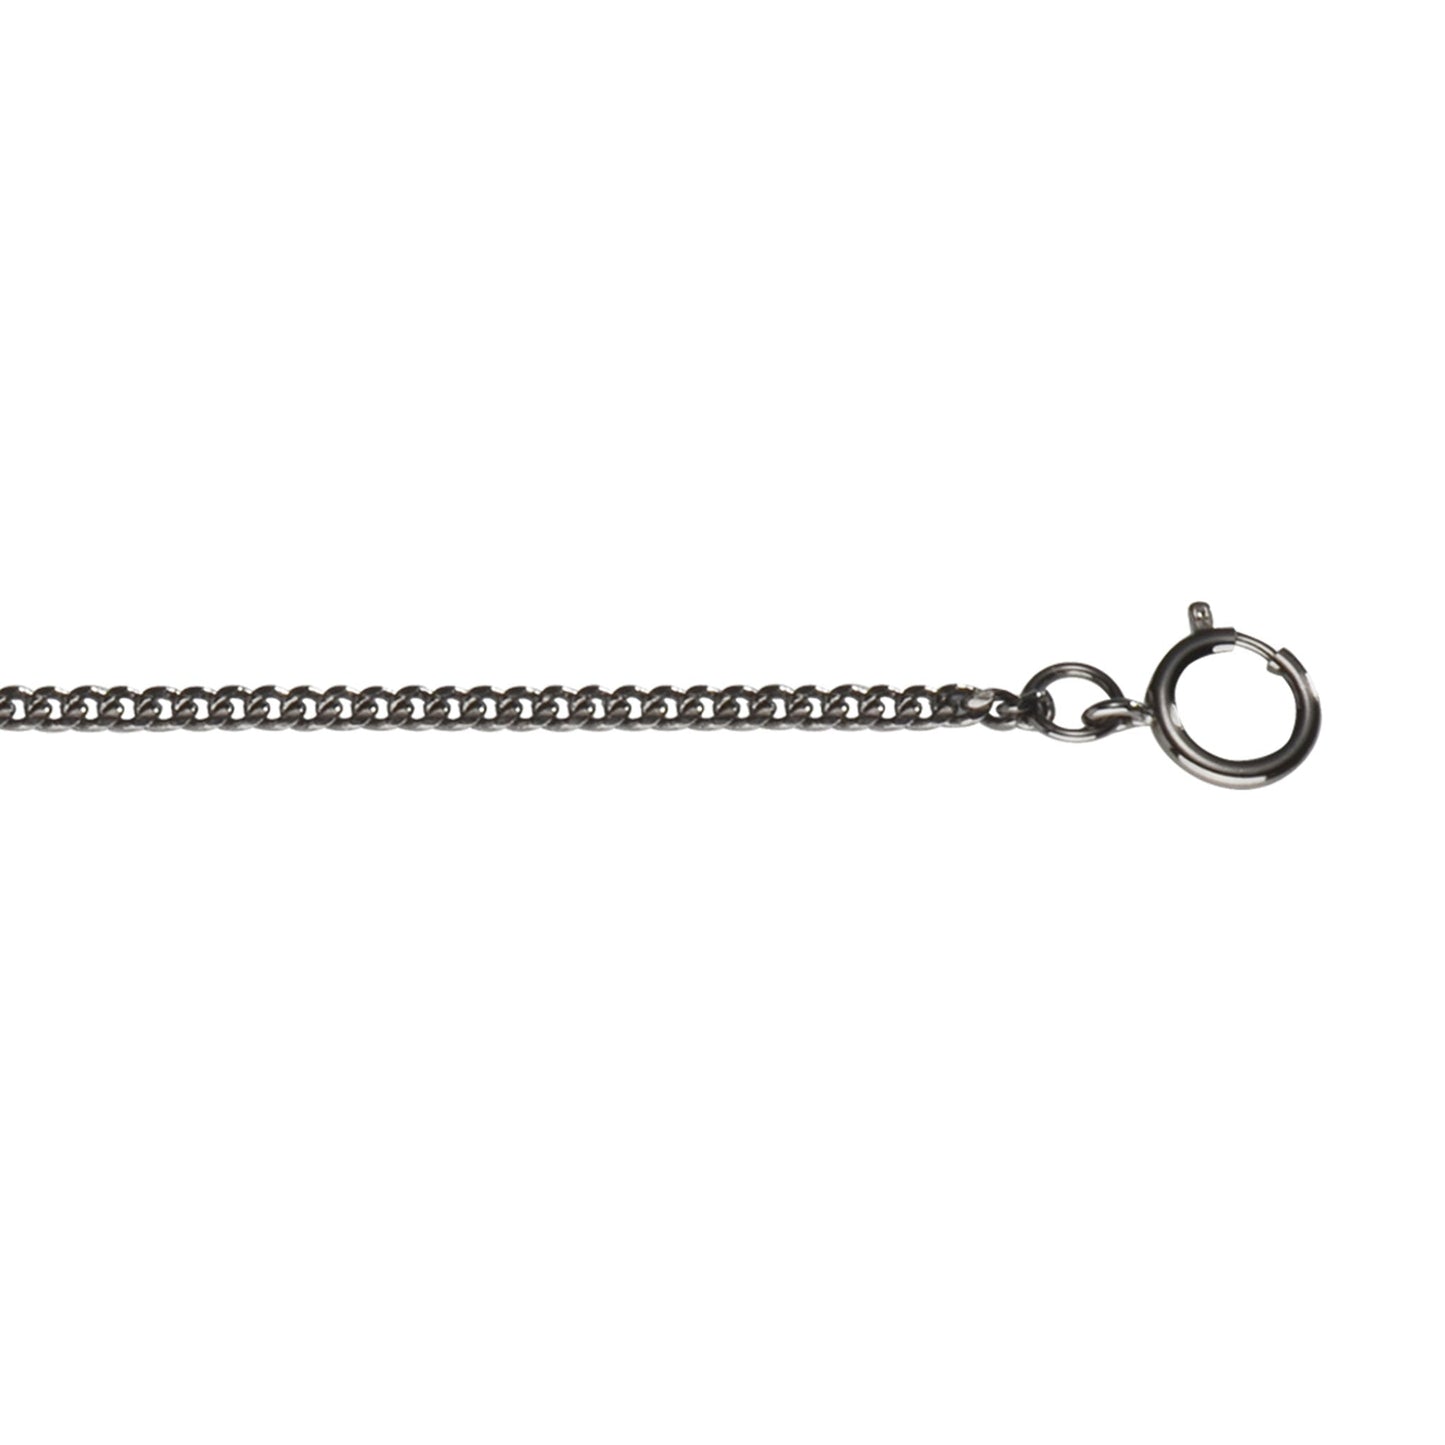 A watch curb chain displayed on a neutral white background.